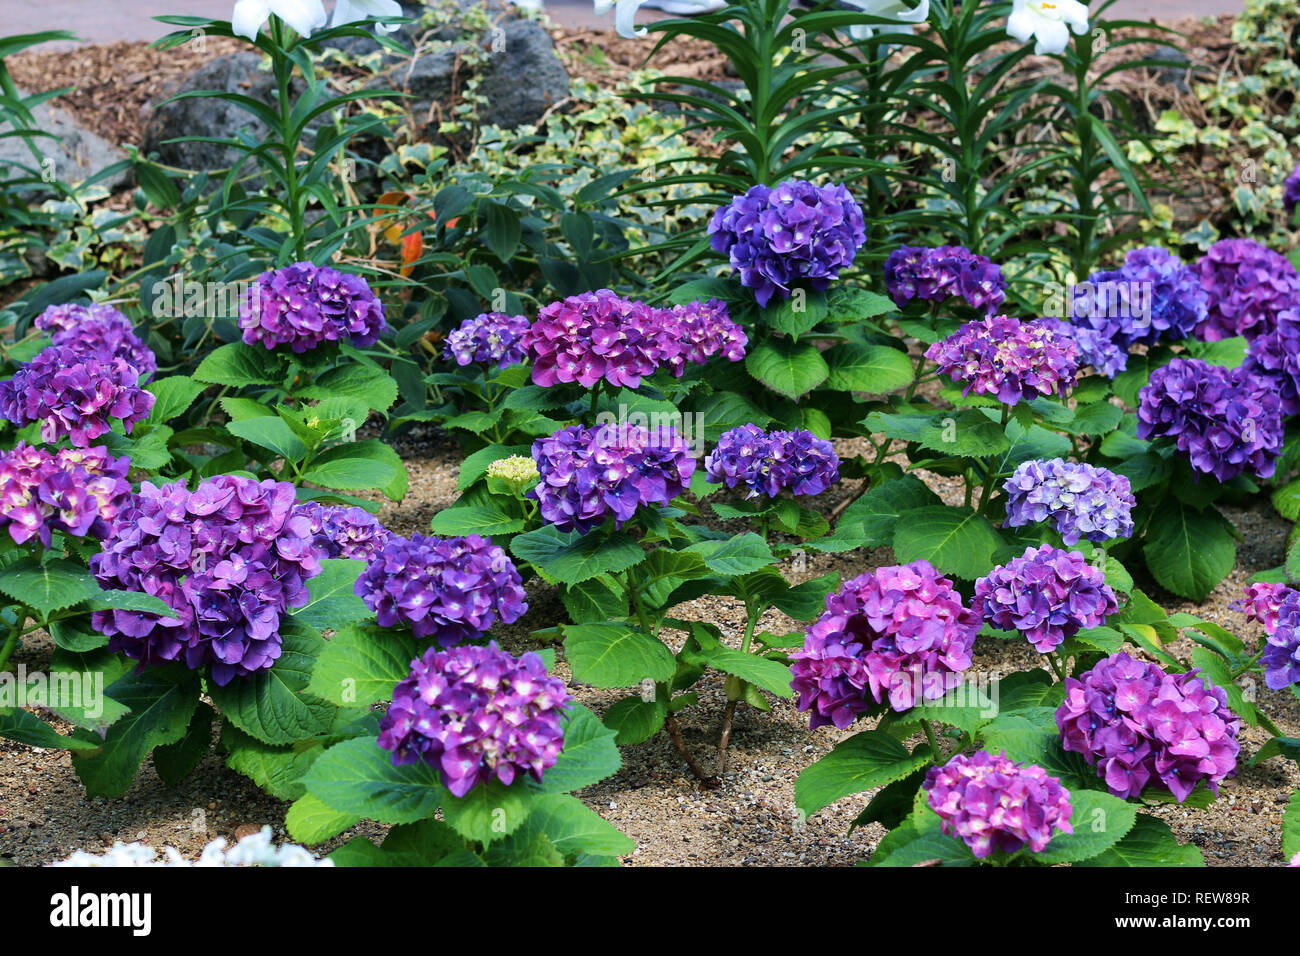 A group of Hydrangea in different shades of purple in a flower garden with Easter Lilies growing in the background Stock Photo